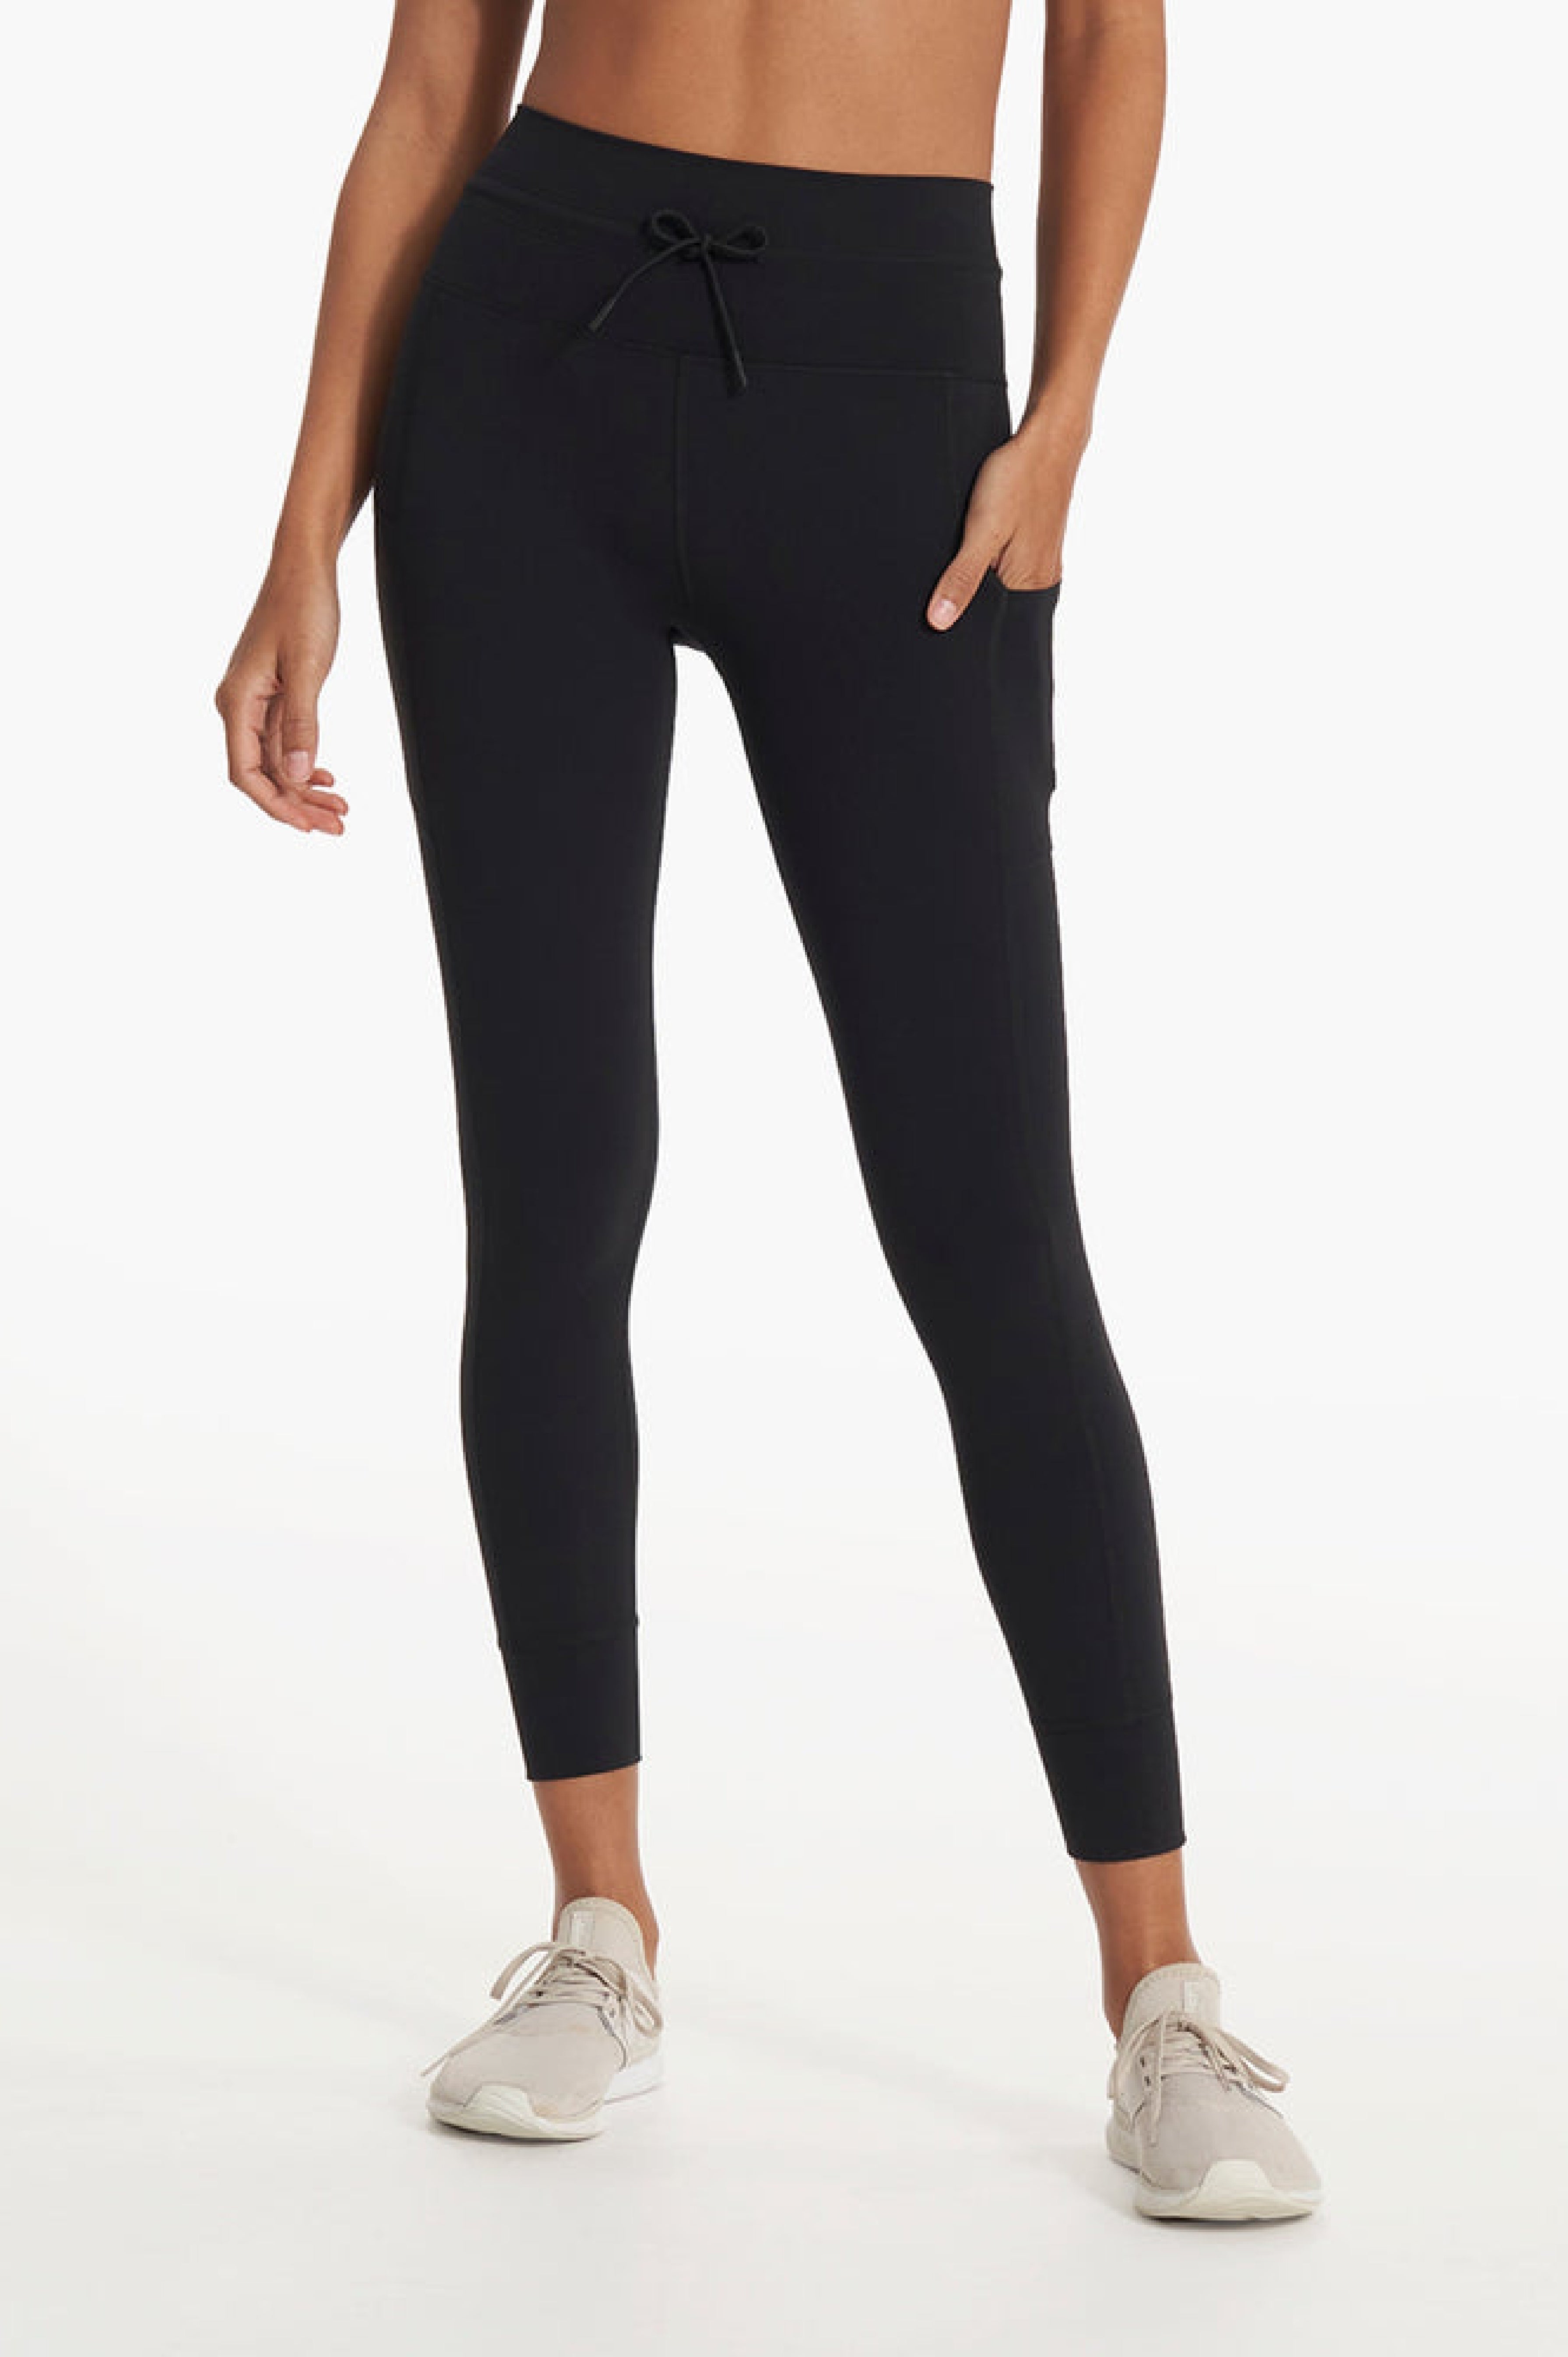 shoppers call these bestselling leggings 'better than